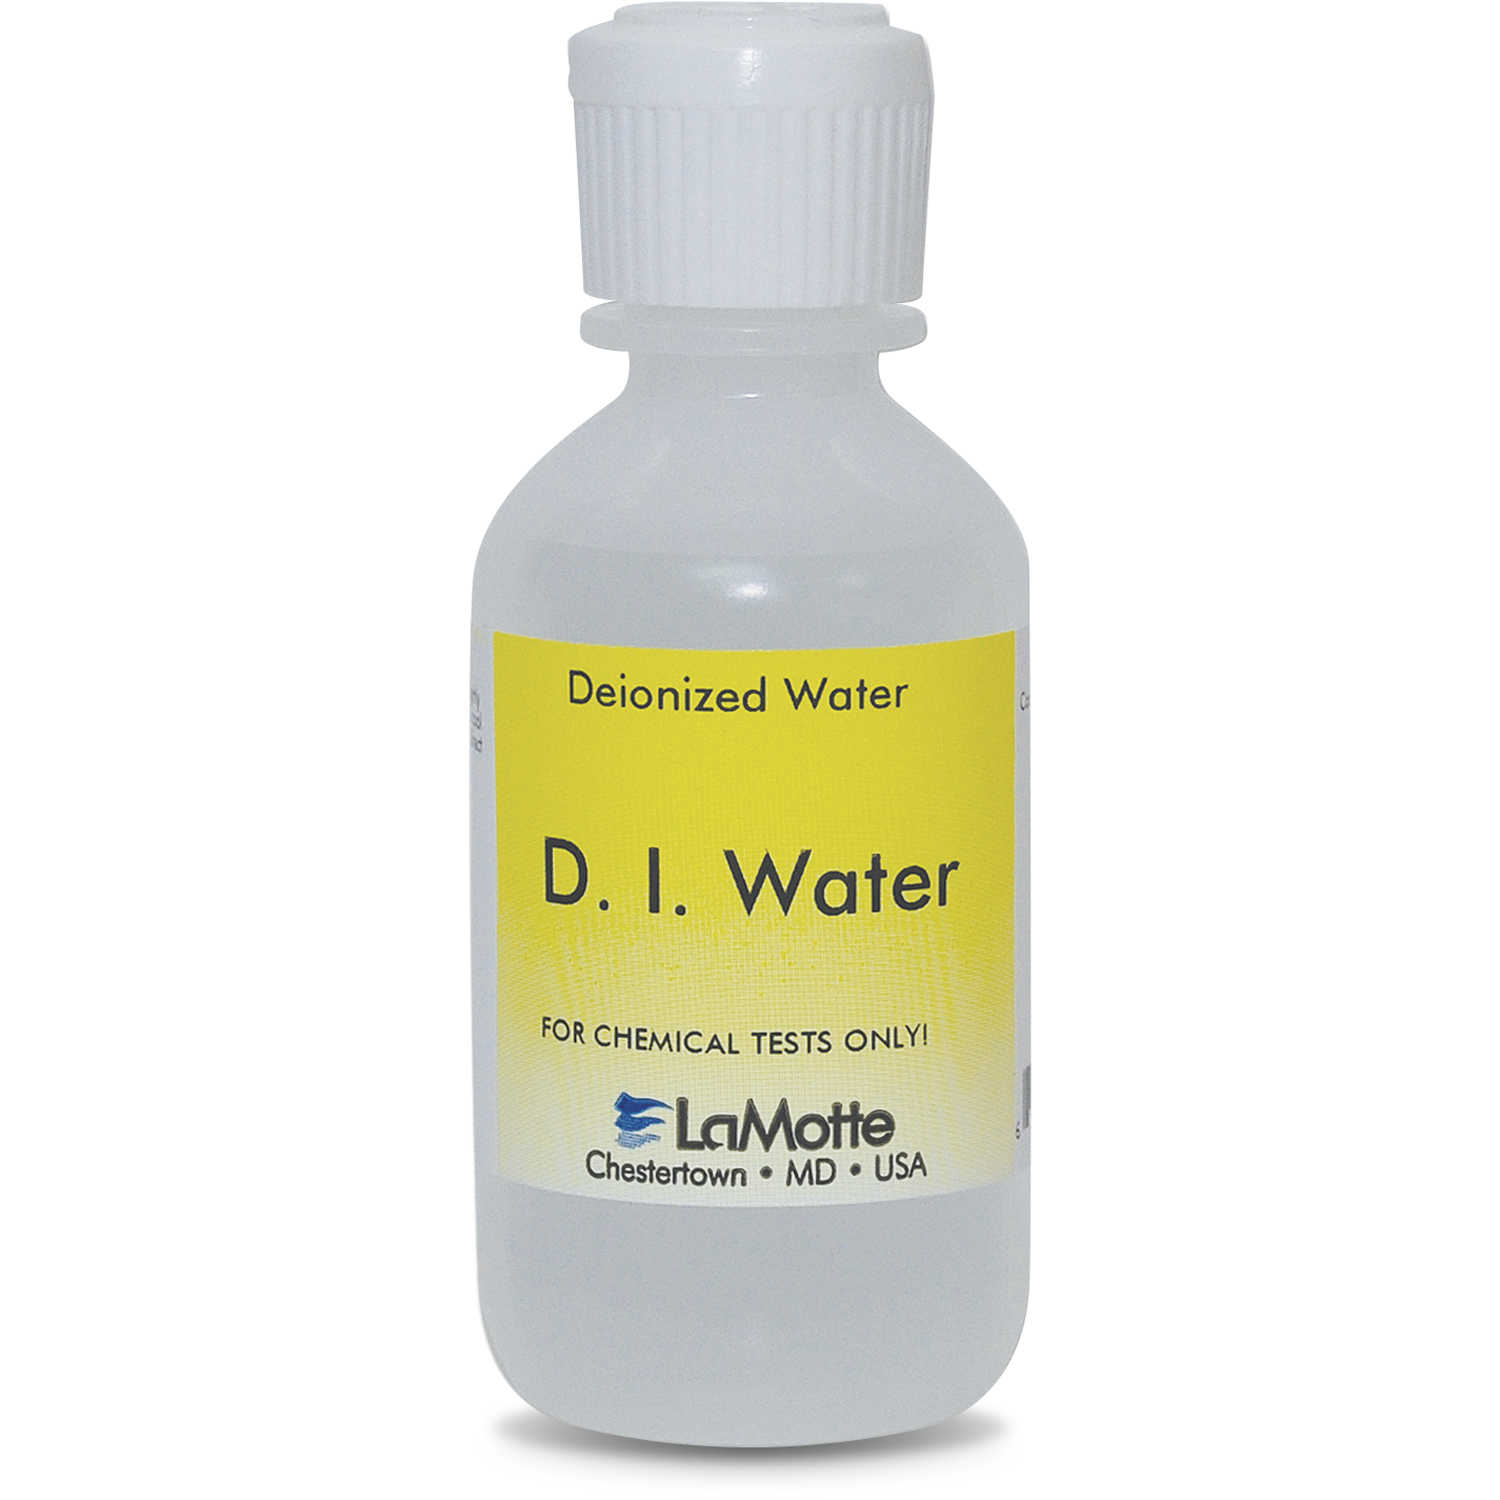 lamotte-deionized-water-60-ml-forestry-suppliers-inc